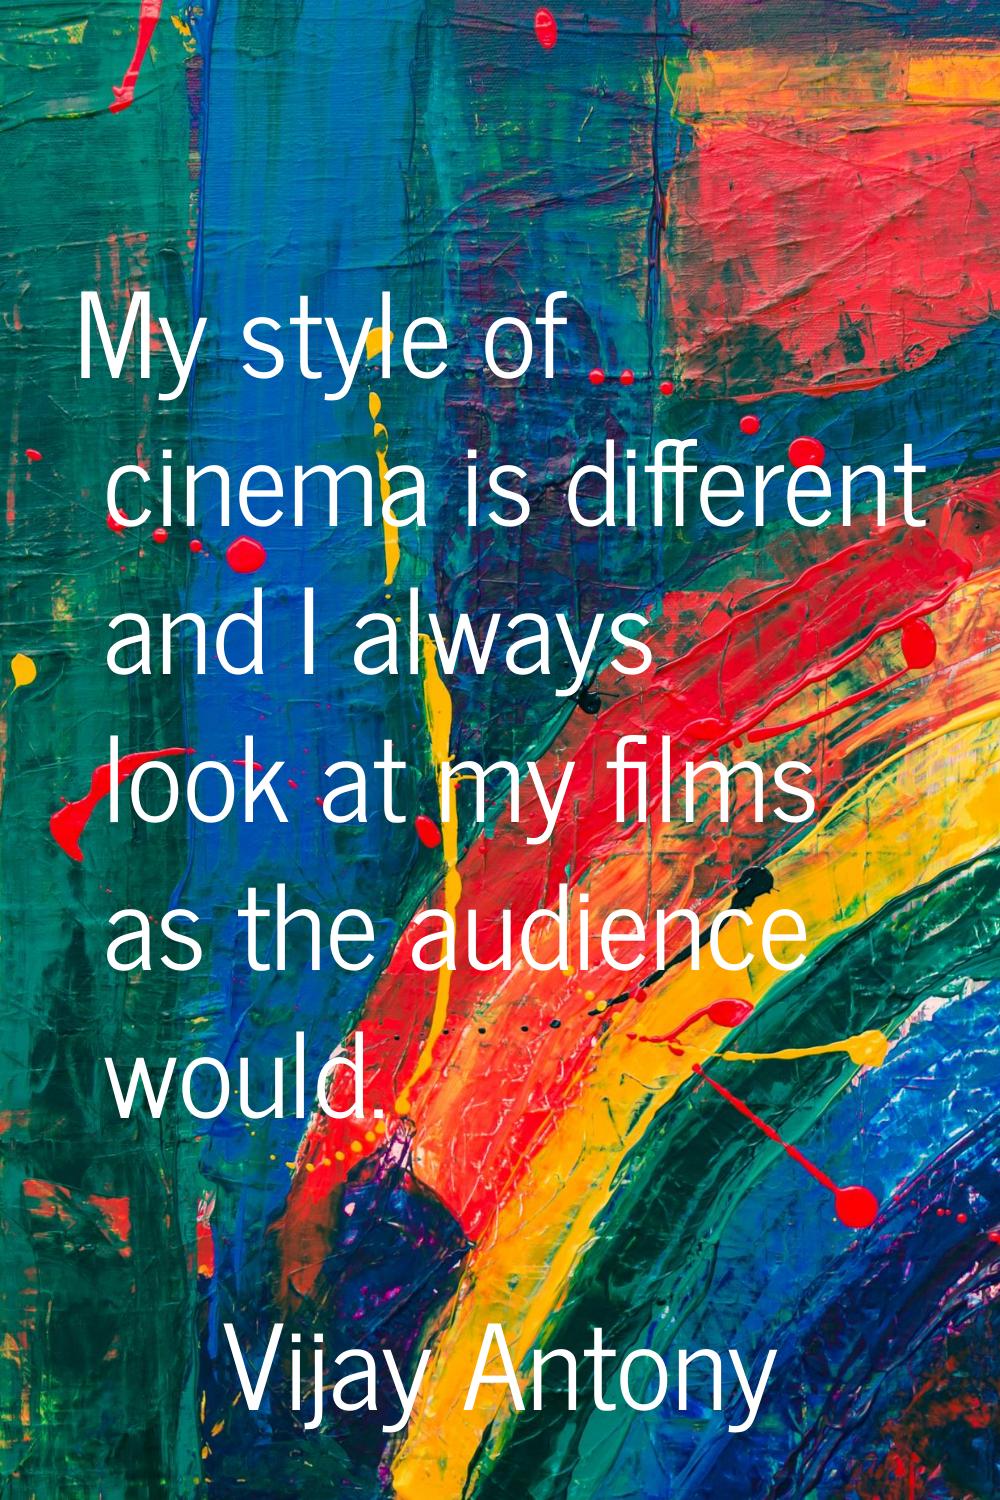 My style of cinema is different and I always look at my films as the audience would.